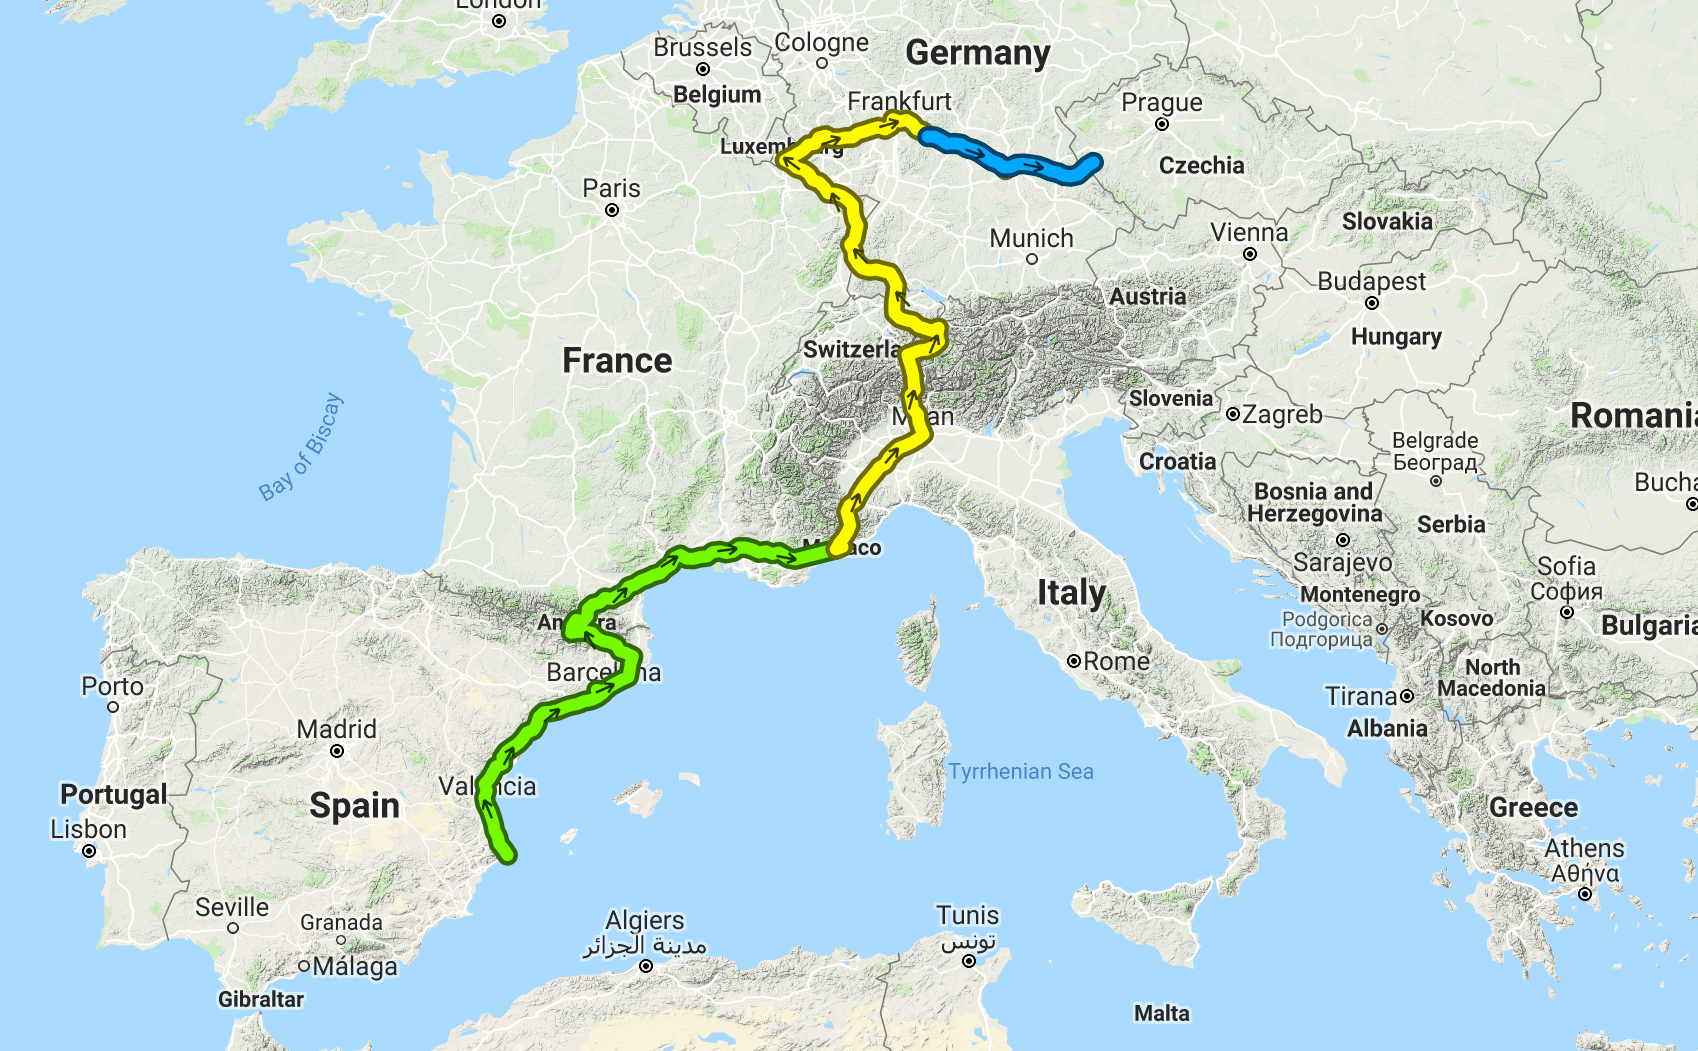 Progress from Spain to Germany in the least direct route